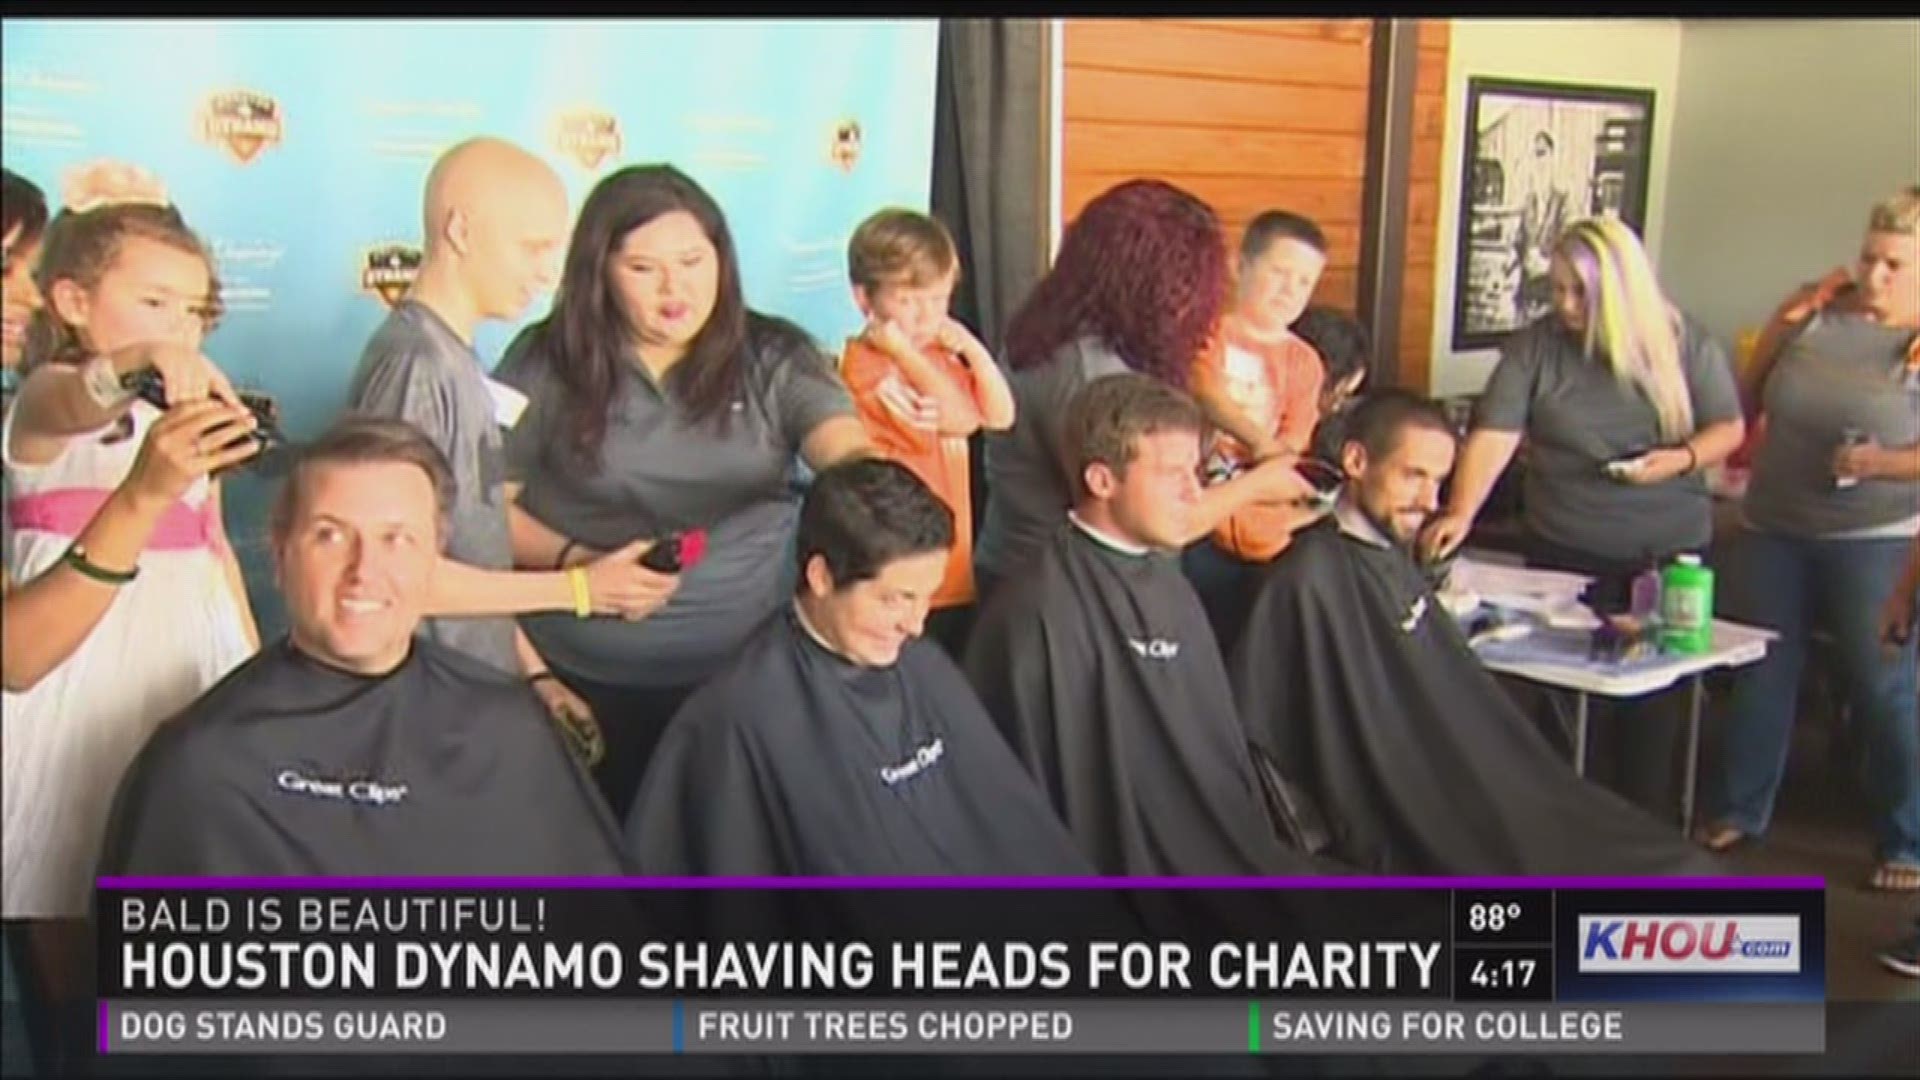 The Houston Dynamo held their annual head-shaving event: Bald Is Beautiful, which raises money for children's cancer research.